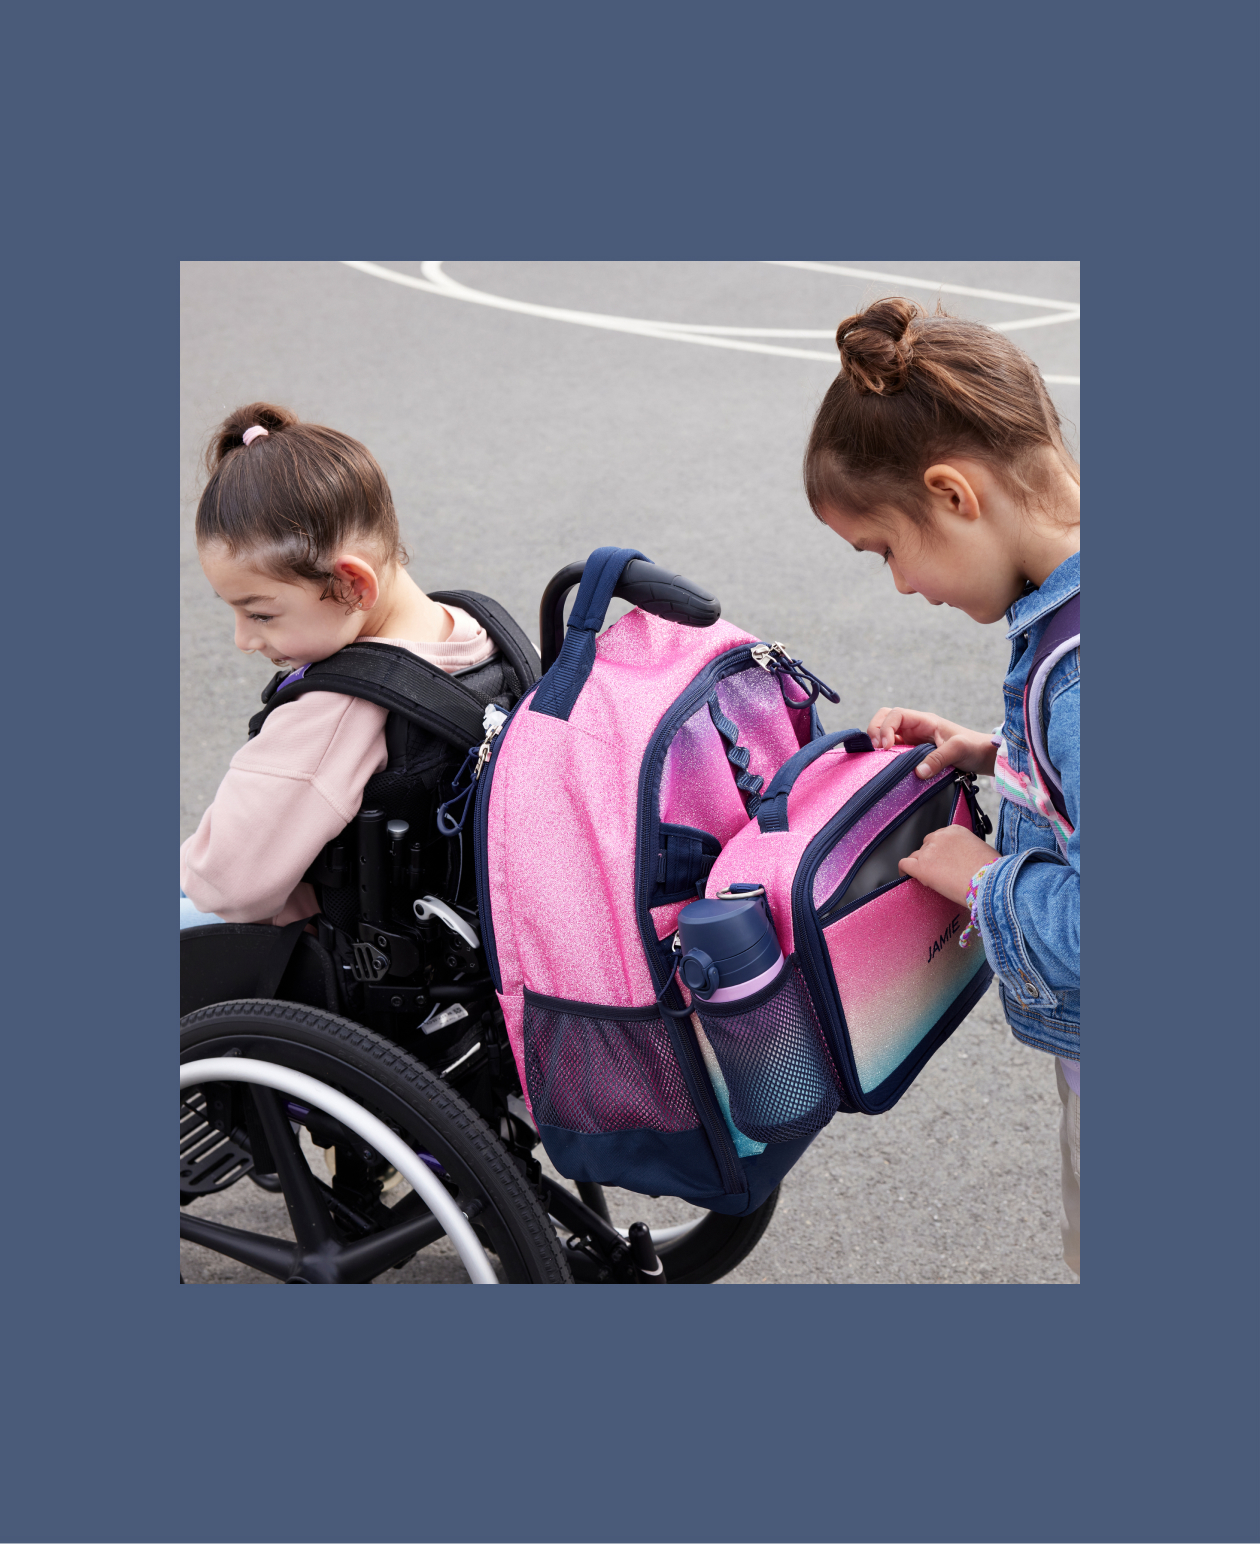 Image shows two young girls on a school blacktop. One girl sits in a wheelchair with a Pottery Barn Kids Mackenzie Adaptive Backpack in Ombre Glitter print attached to it. Attached to the backpack is a Pottery Barn Kids Mackenzie Adaptive Lunch Box in Ombre Glitter print. The second young girl looks into the backpack to retrieve something.